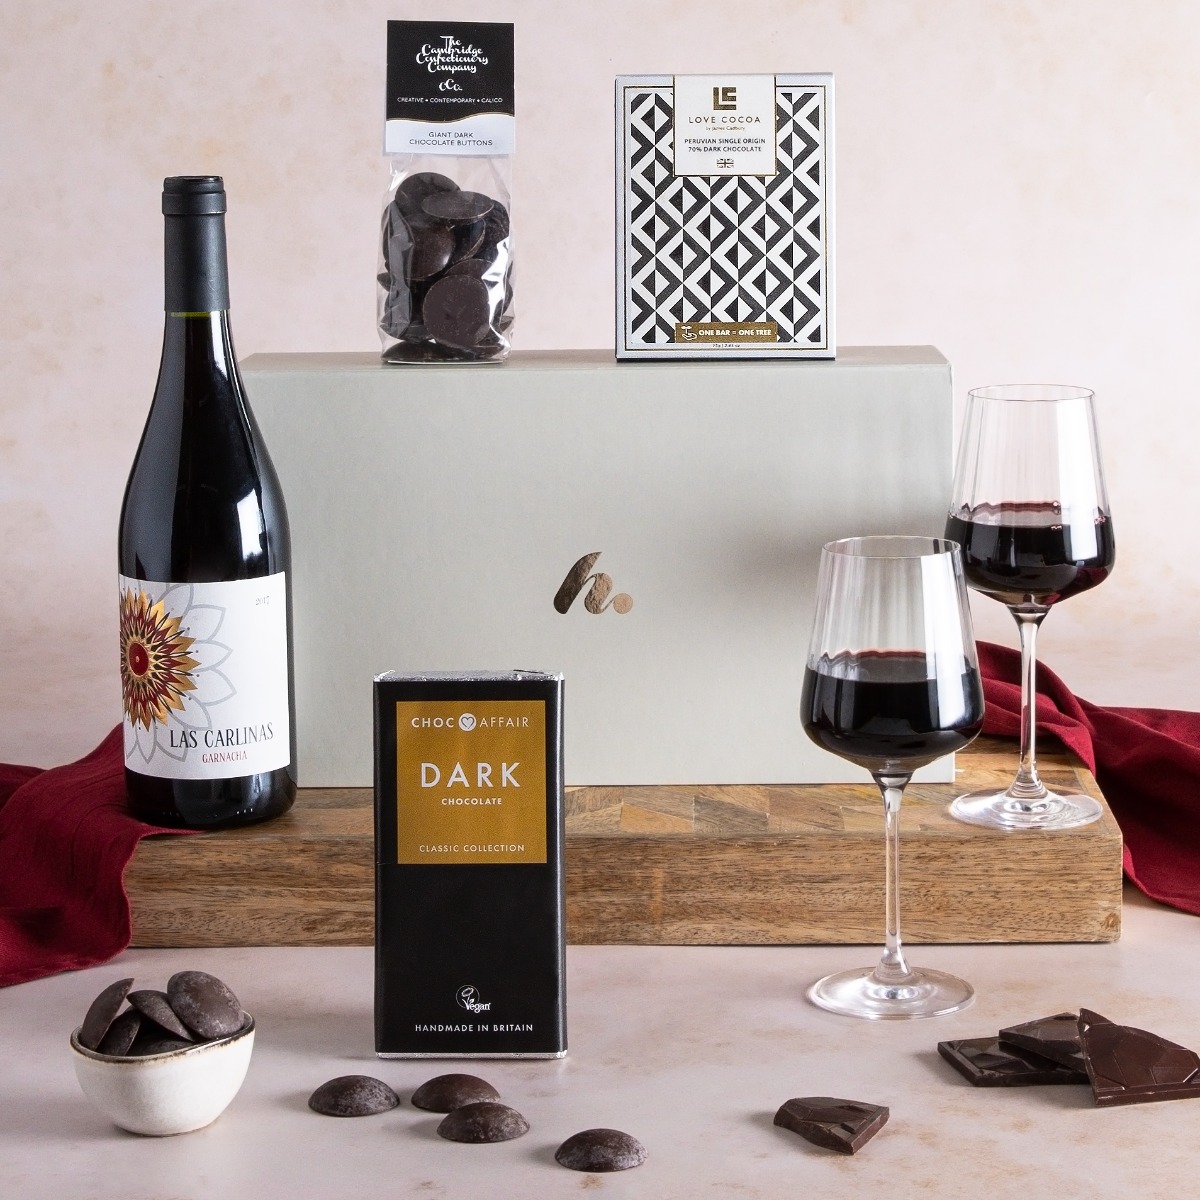 Red Wine & Dark Chocolate Gift Box with contents on display